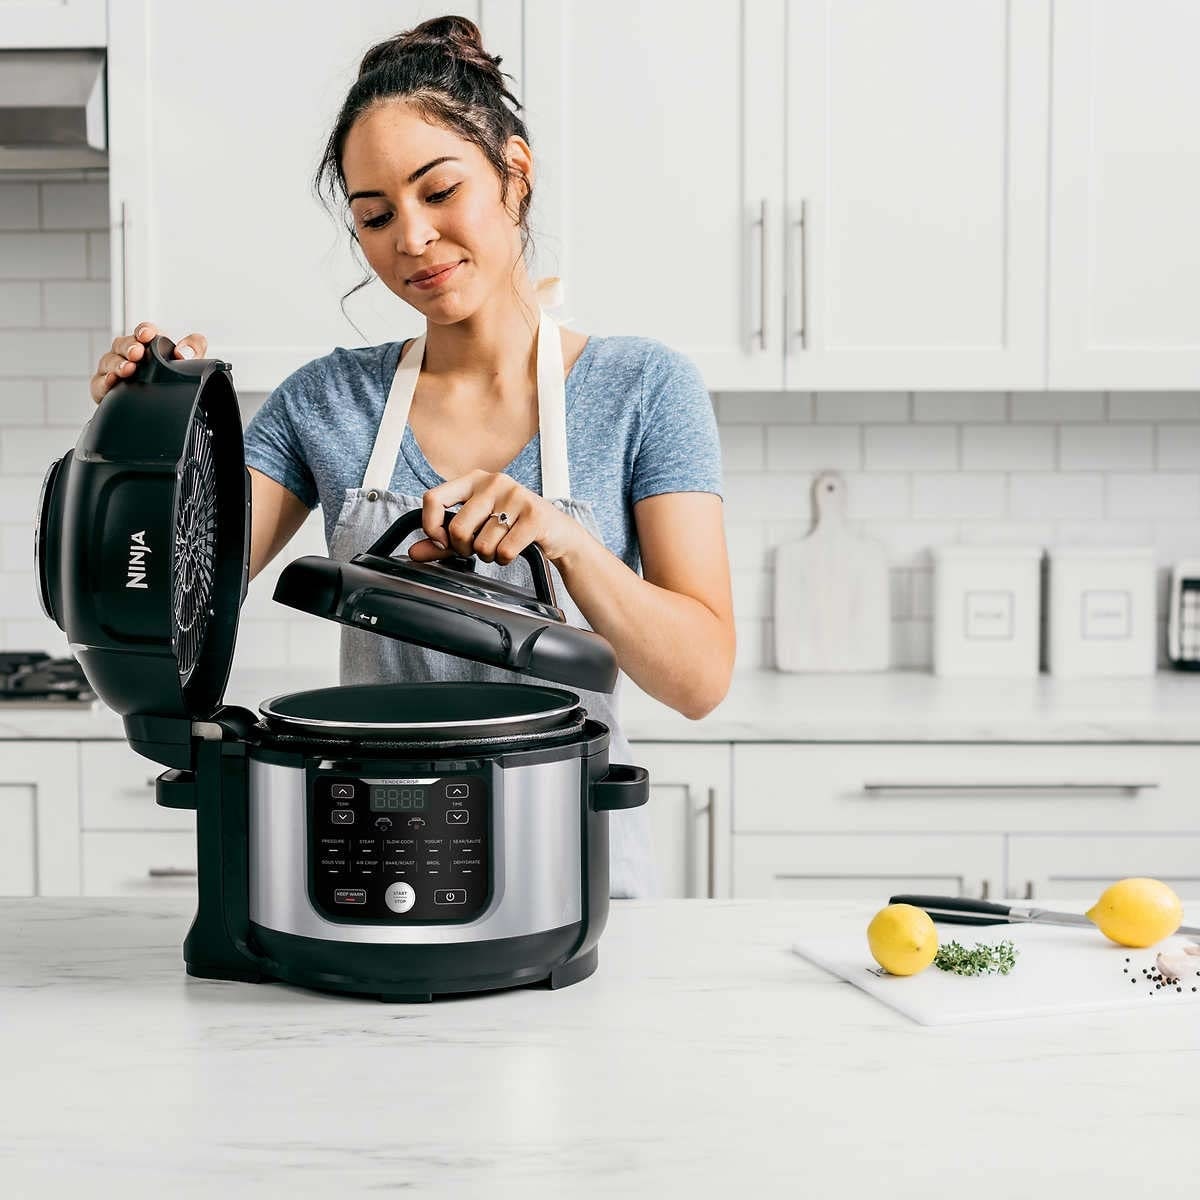 https://ak1.ostkcdn.com/images/products/is/images/direct/96842deed603ee466604e5e7e9fd6d3f857306fa/10-in-1-Pressure-Cooker-and-Air-Fryer-with-Nesting-Broil-Rack%2C-6.5-Quart-Stainless-Steel-Rice-Cooker.jpg